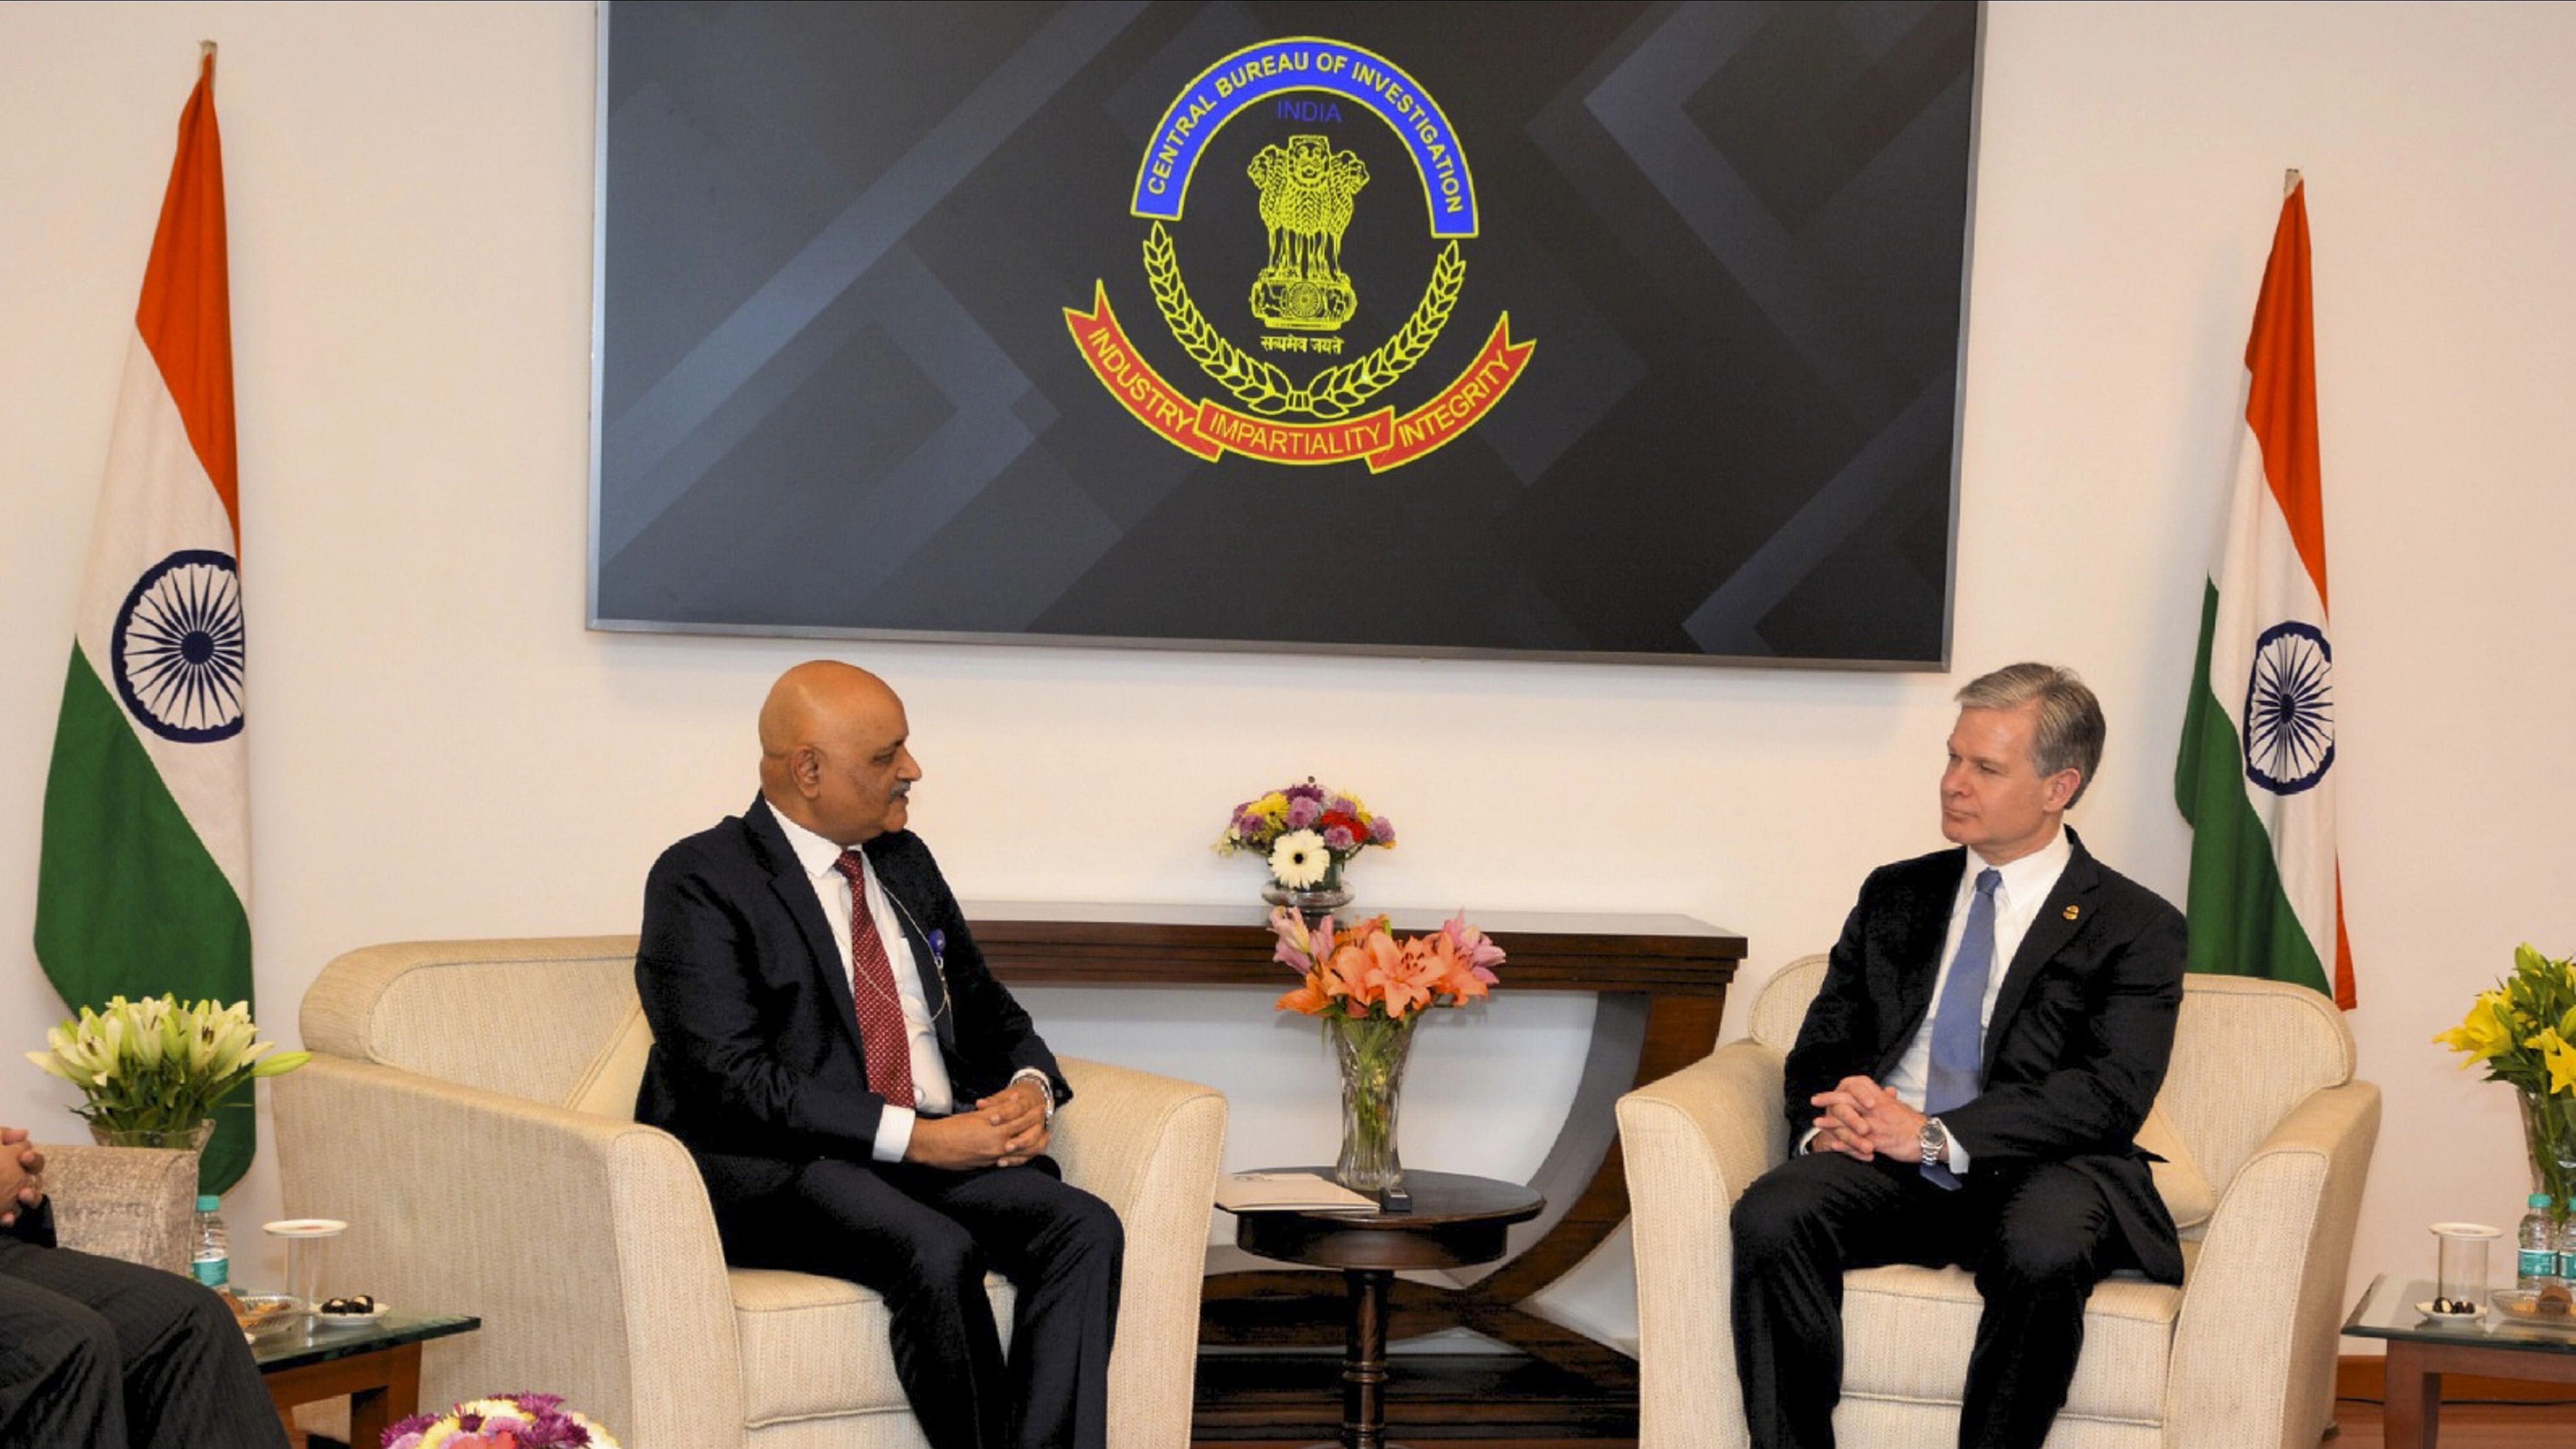 <div class="paragraphs"><p>During the visit, FBI Director held discussions with Mr. Praveen Sood, Director, CBI and senior officials of CBI. He also visited the Global Operations Centre of CBI.</p></div>